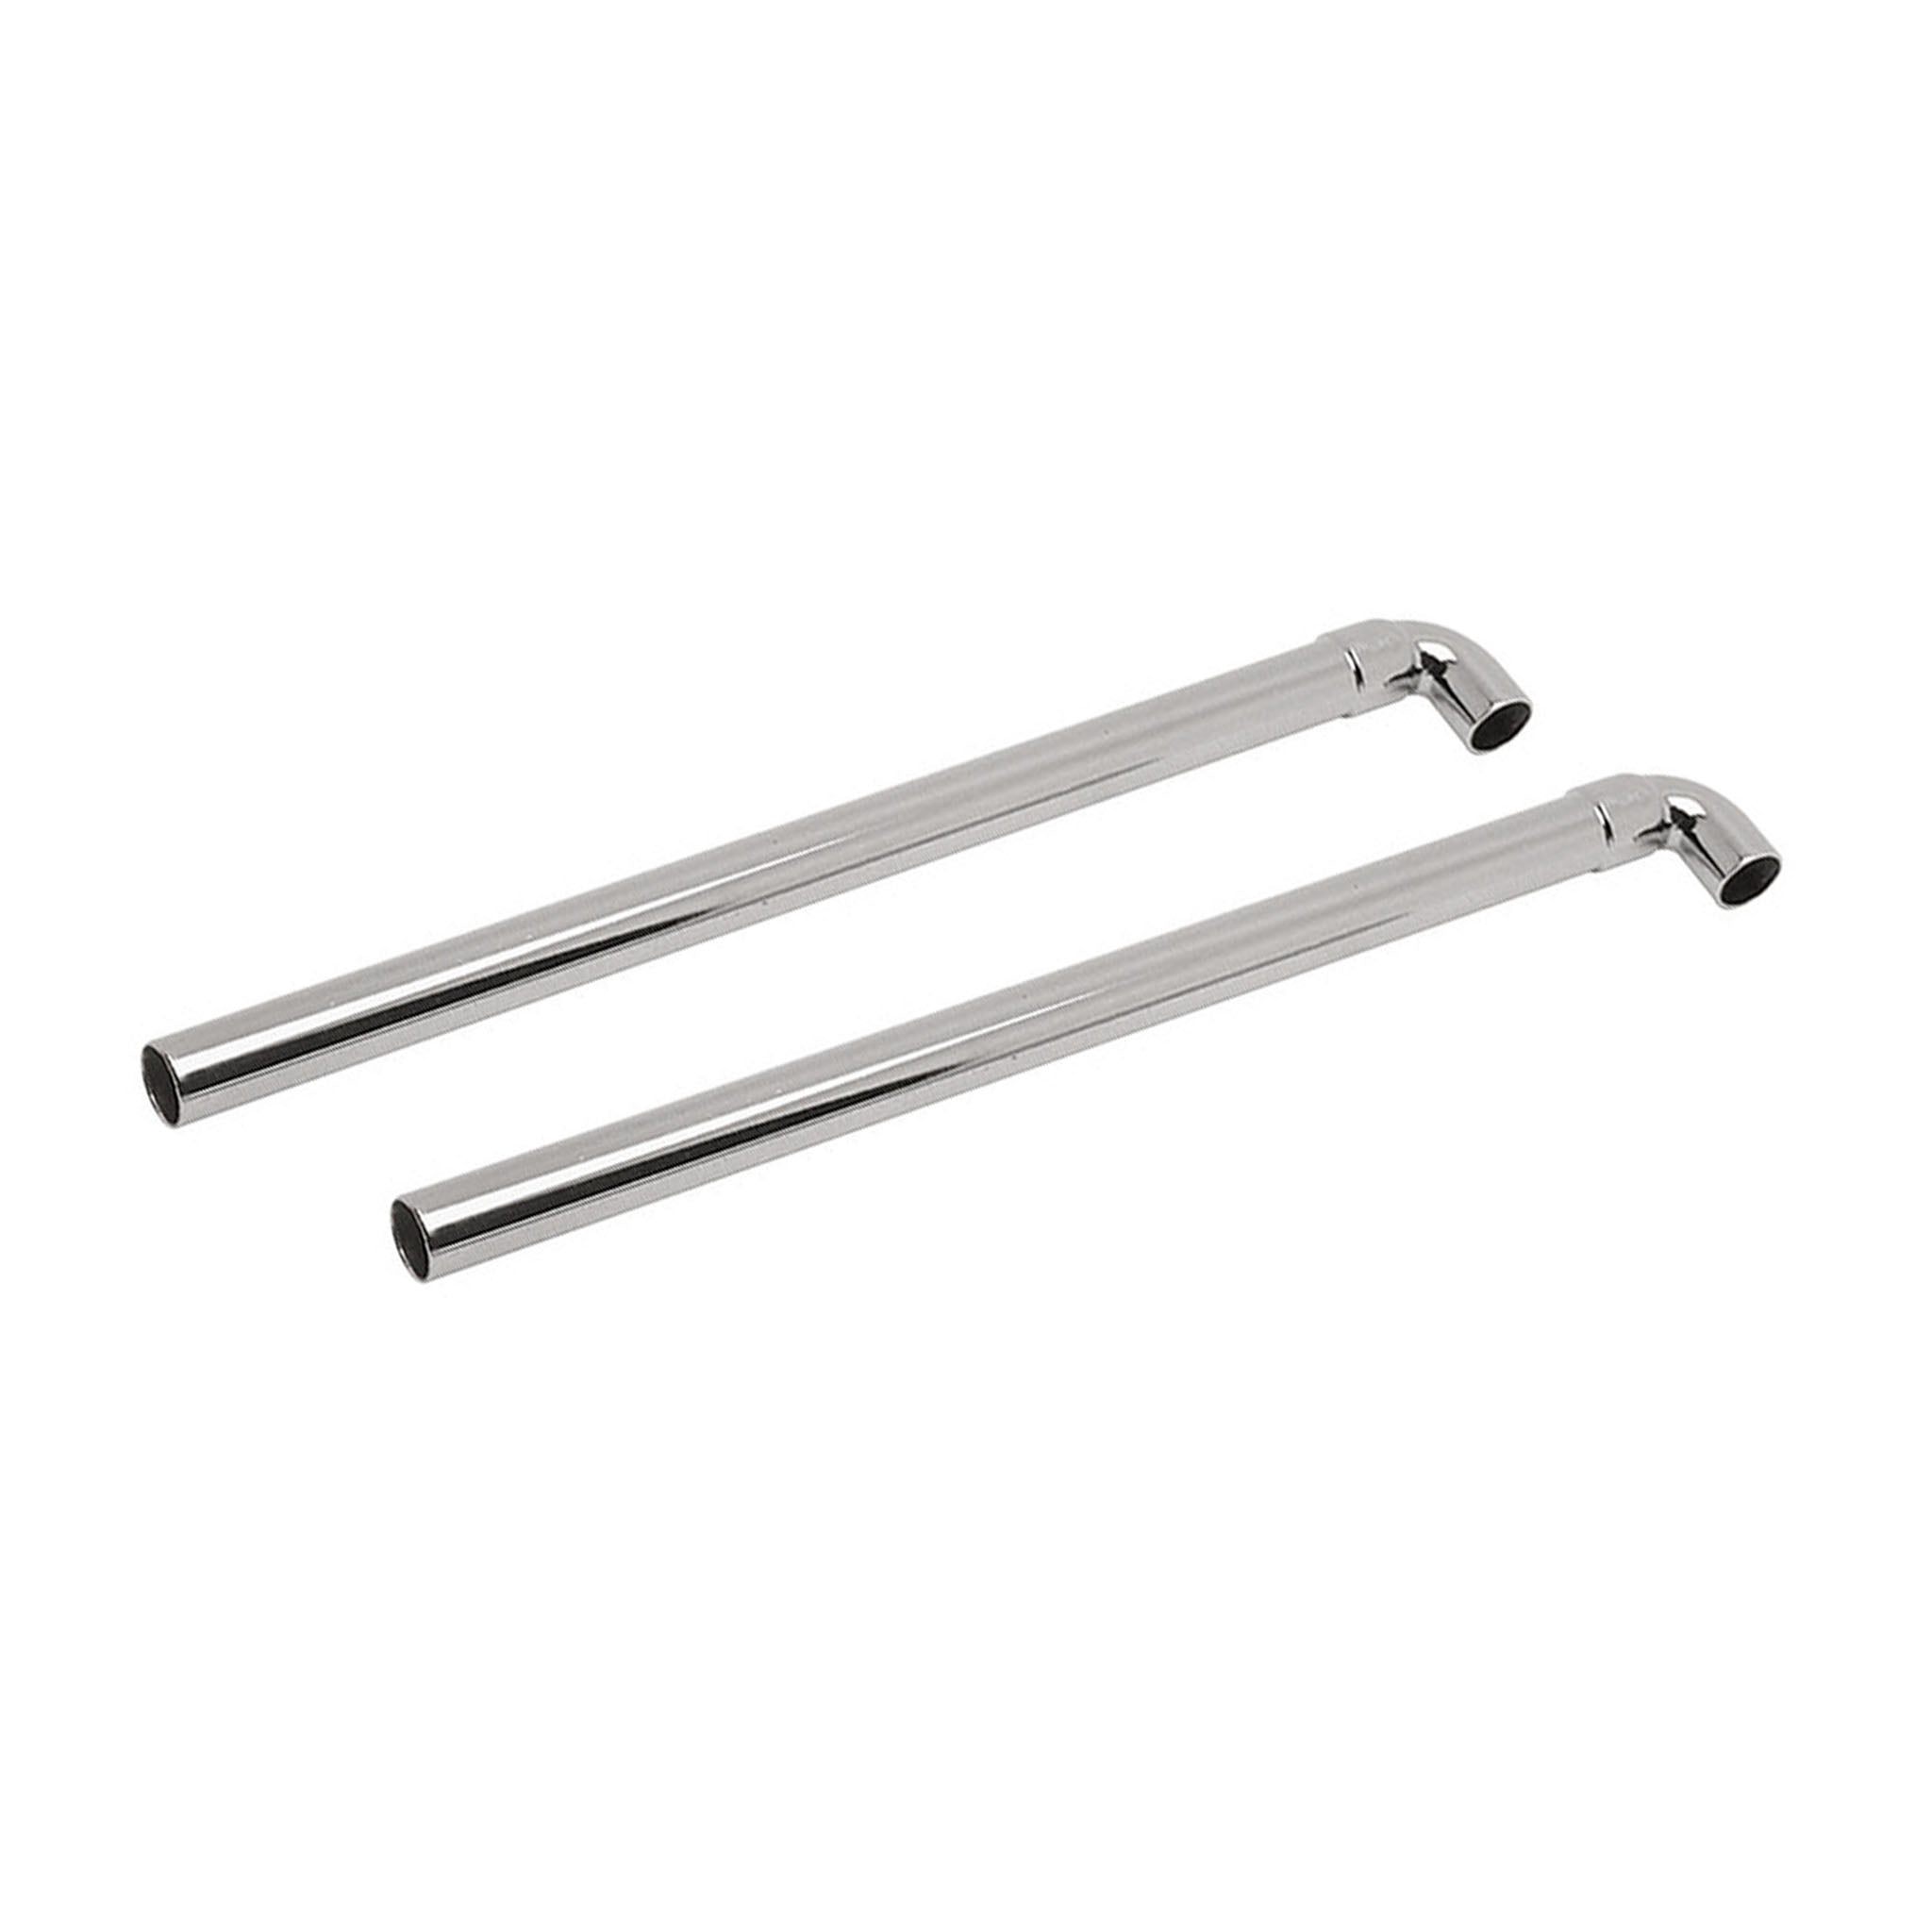 Vogue Street Elbow Connection Tubes 15 x 250mm (Pair)